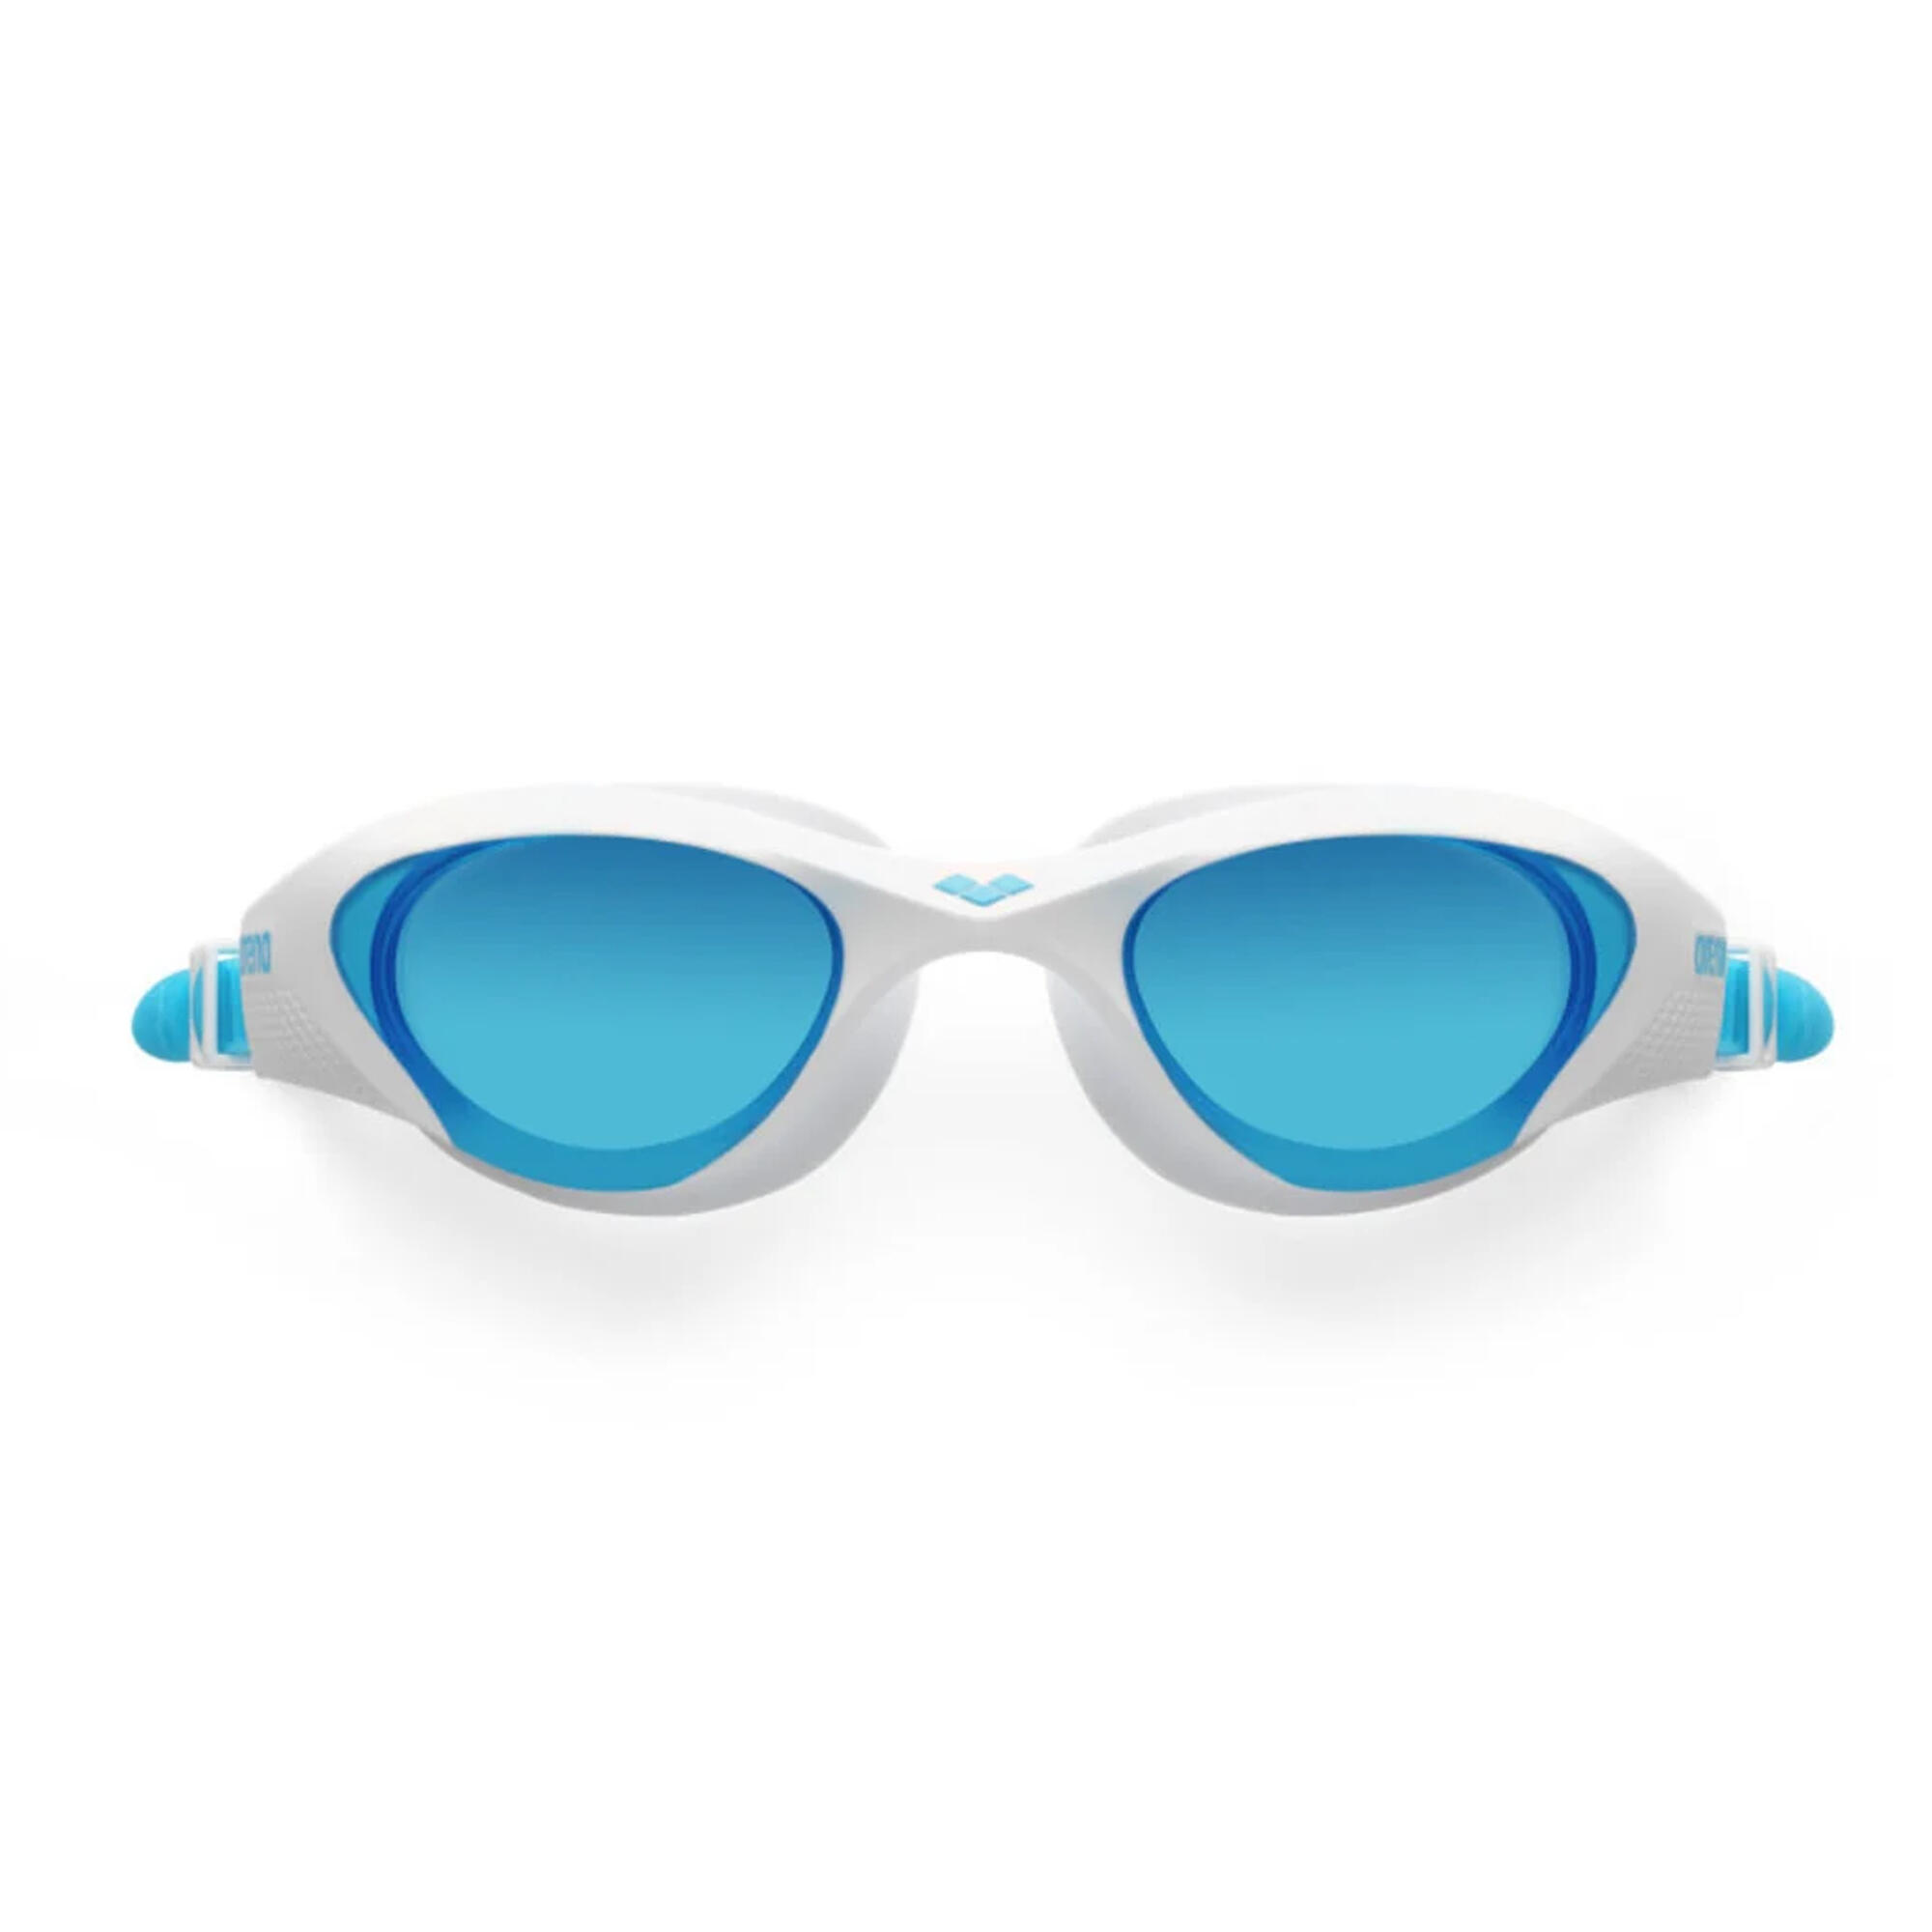 ARENA Unisex Adult The One Swimming Goggles (Light Blue/White/Blue)